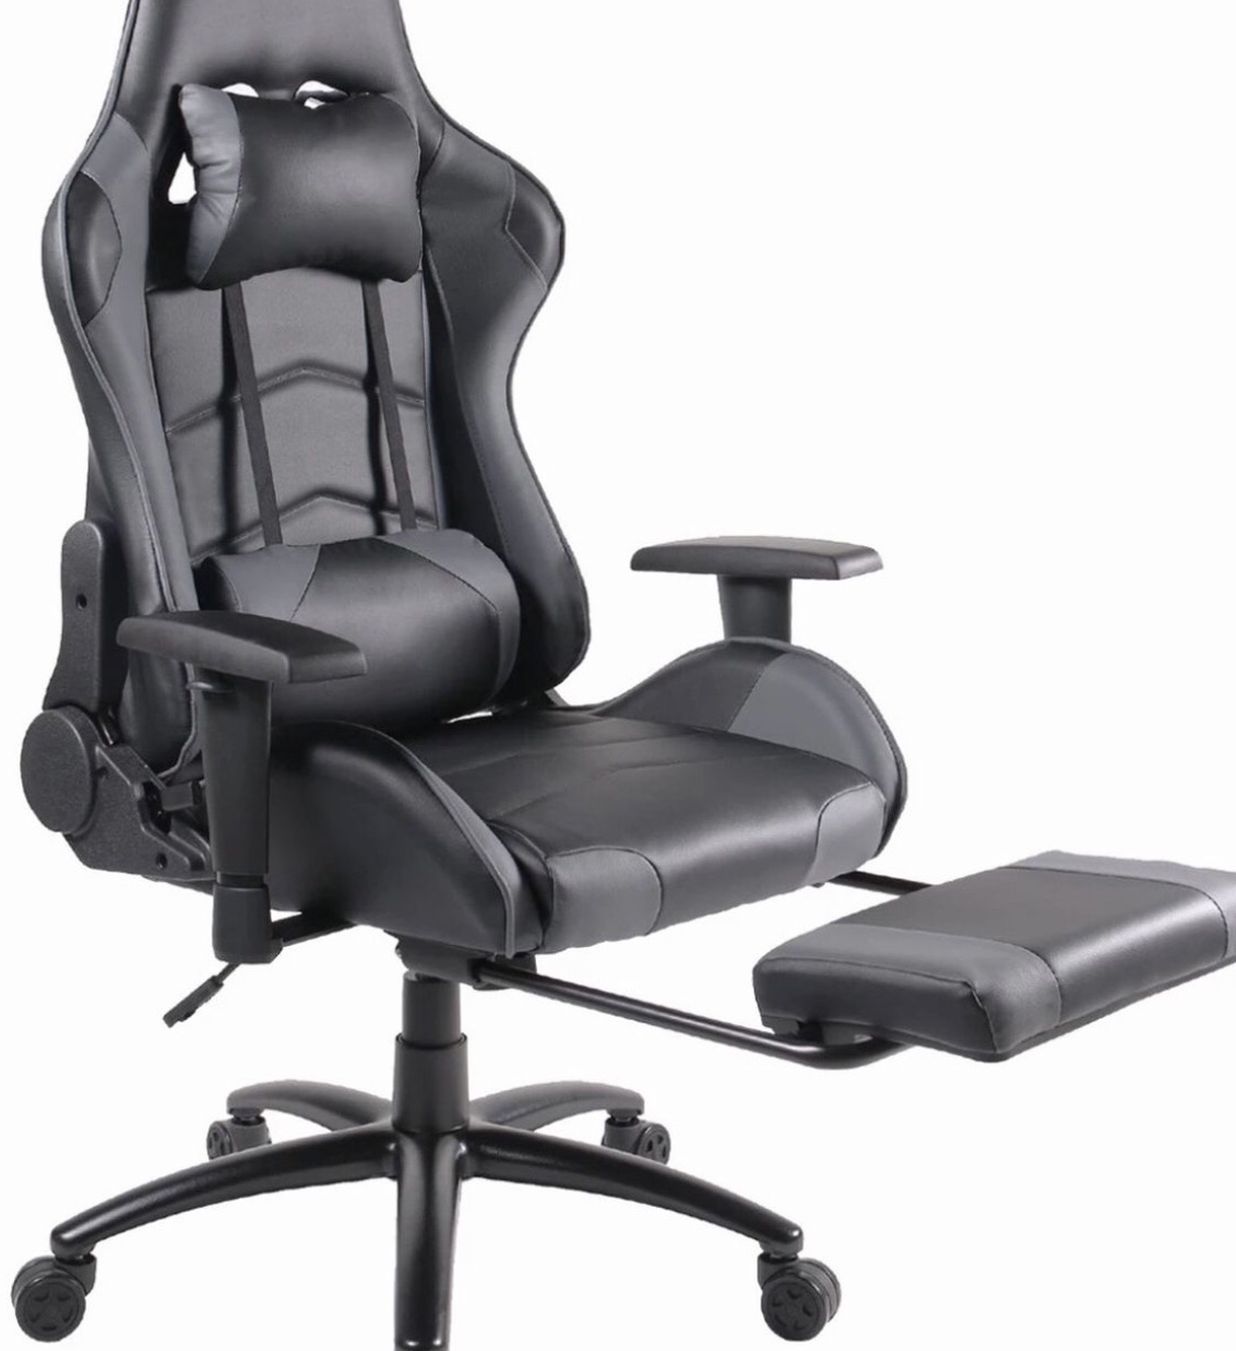 Gaming Racing Office High Back PU Leather Computer Desk Executive and Ergonomic Swivel Chair with Headrest